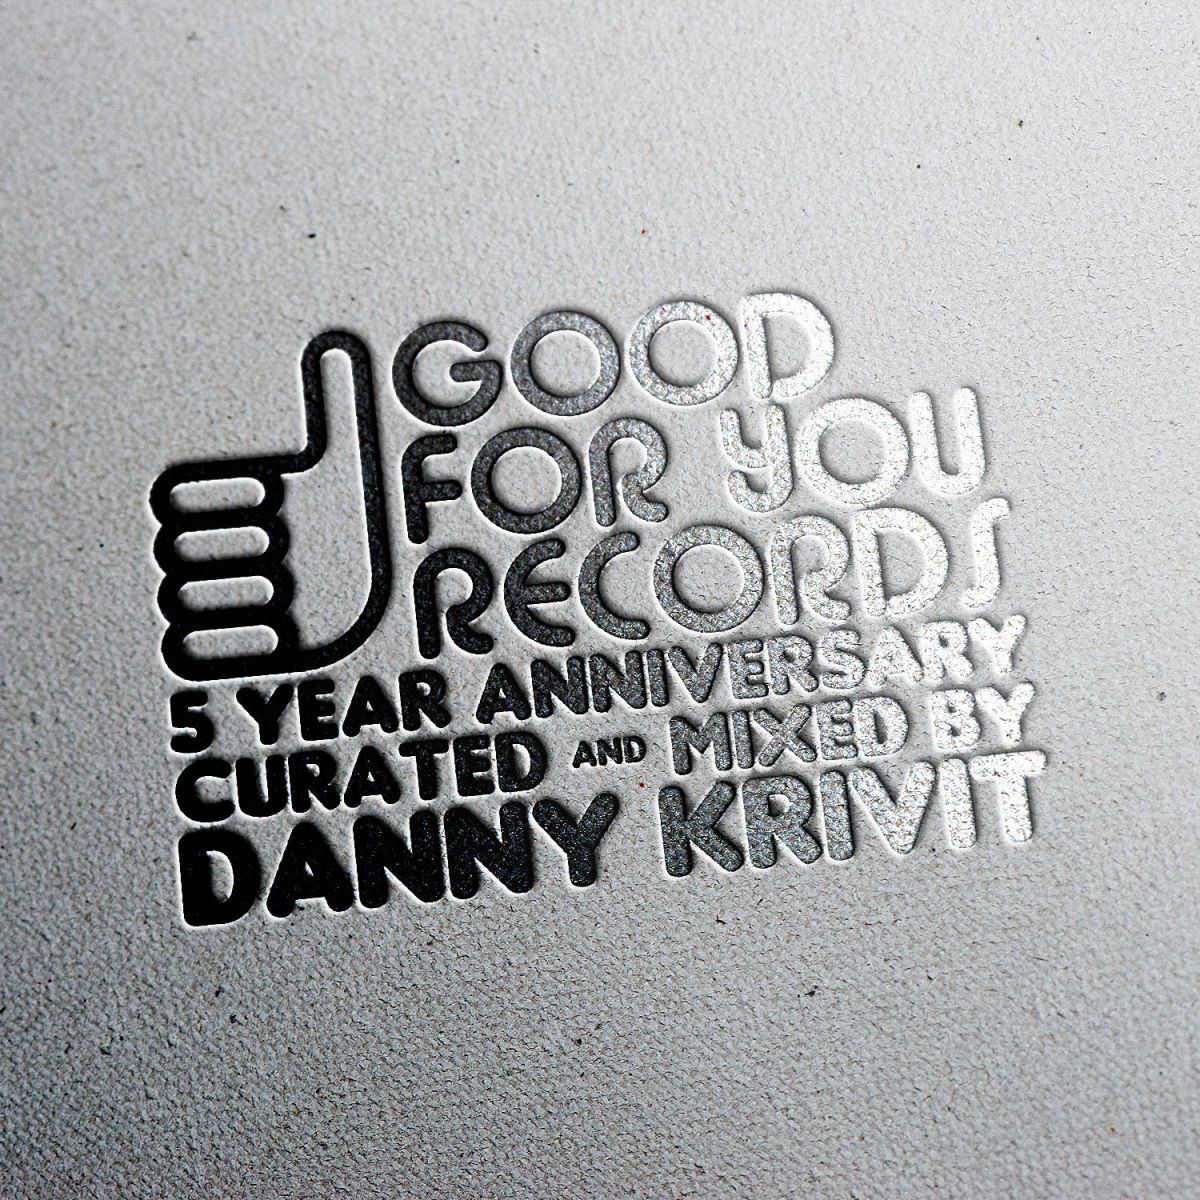 Danny Krivit - 5 Year Anniversary Of Good For You Records / Good For You Records